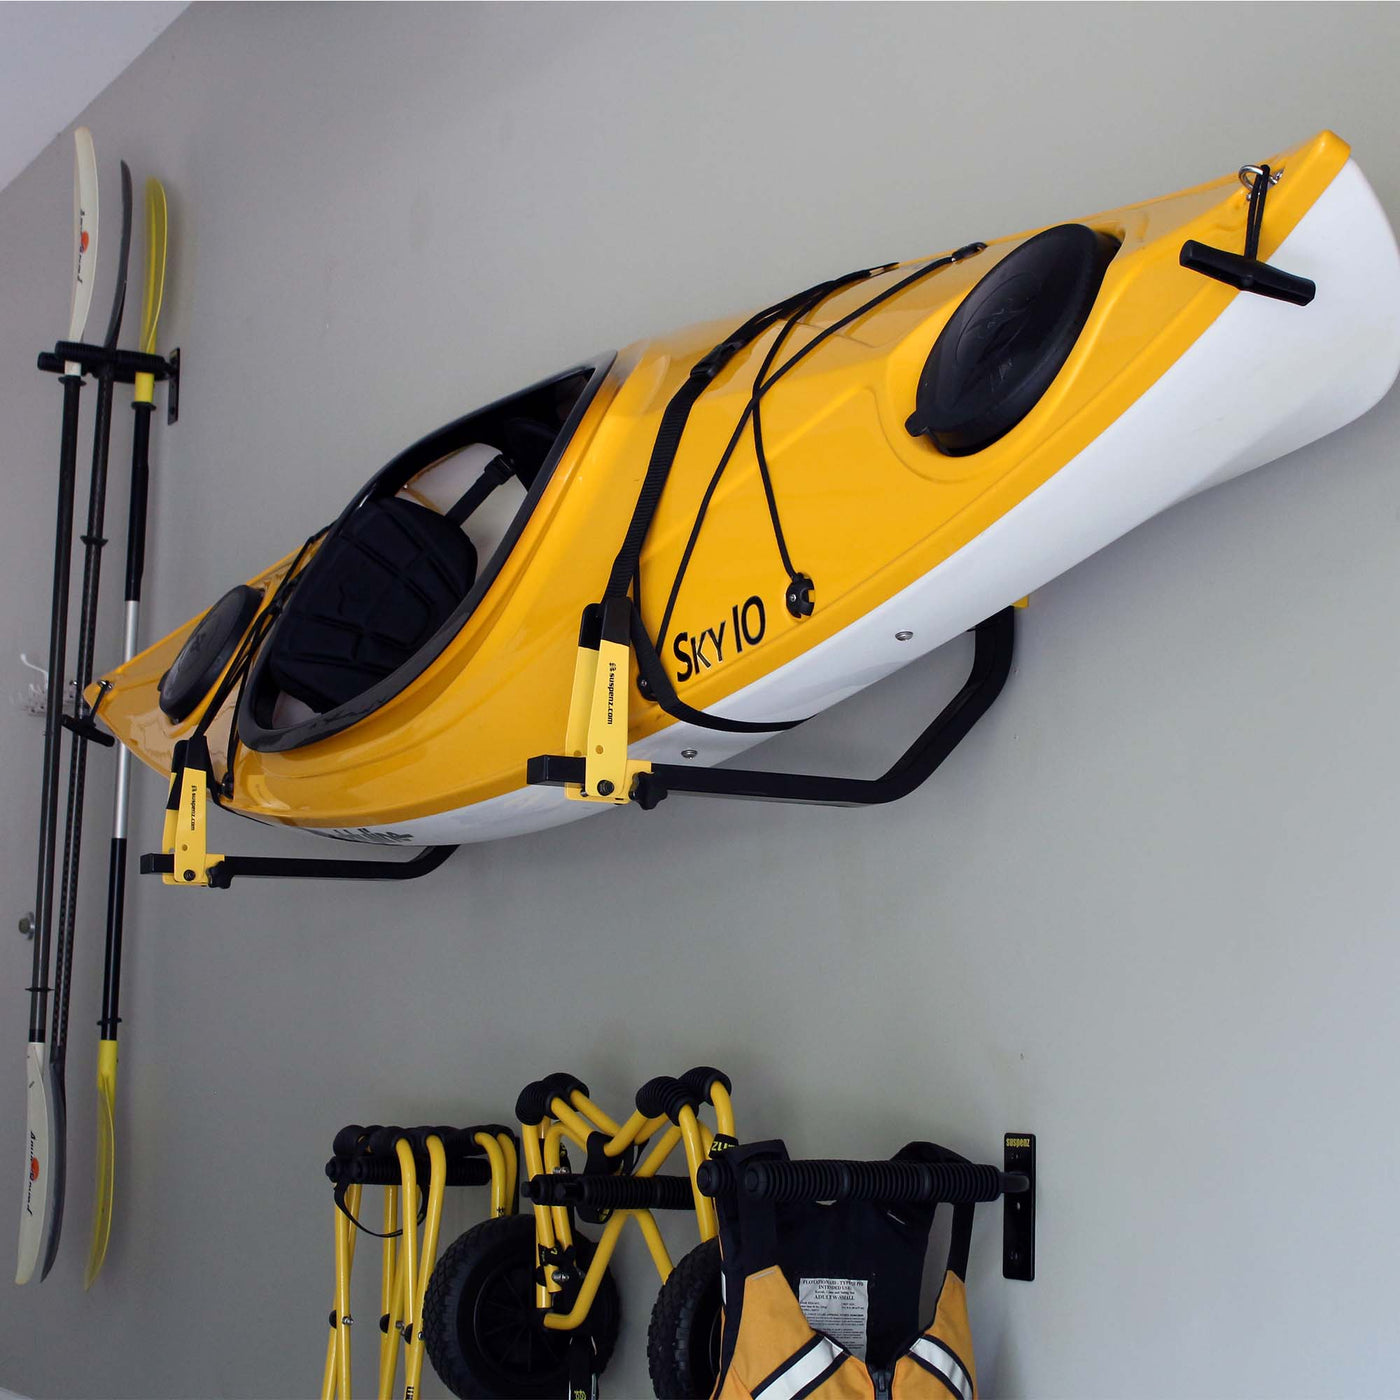 One Deluxe Rack with yellow kayak mounted to a garage wall.